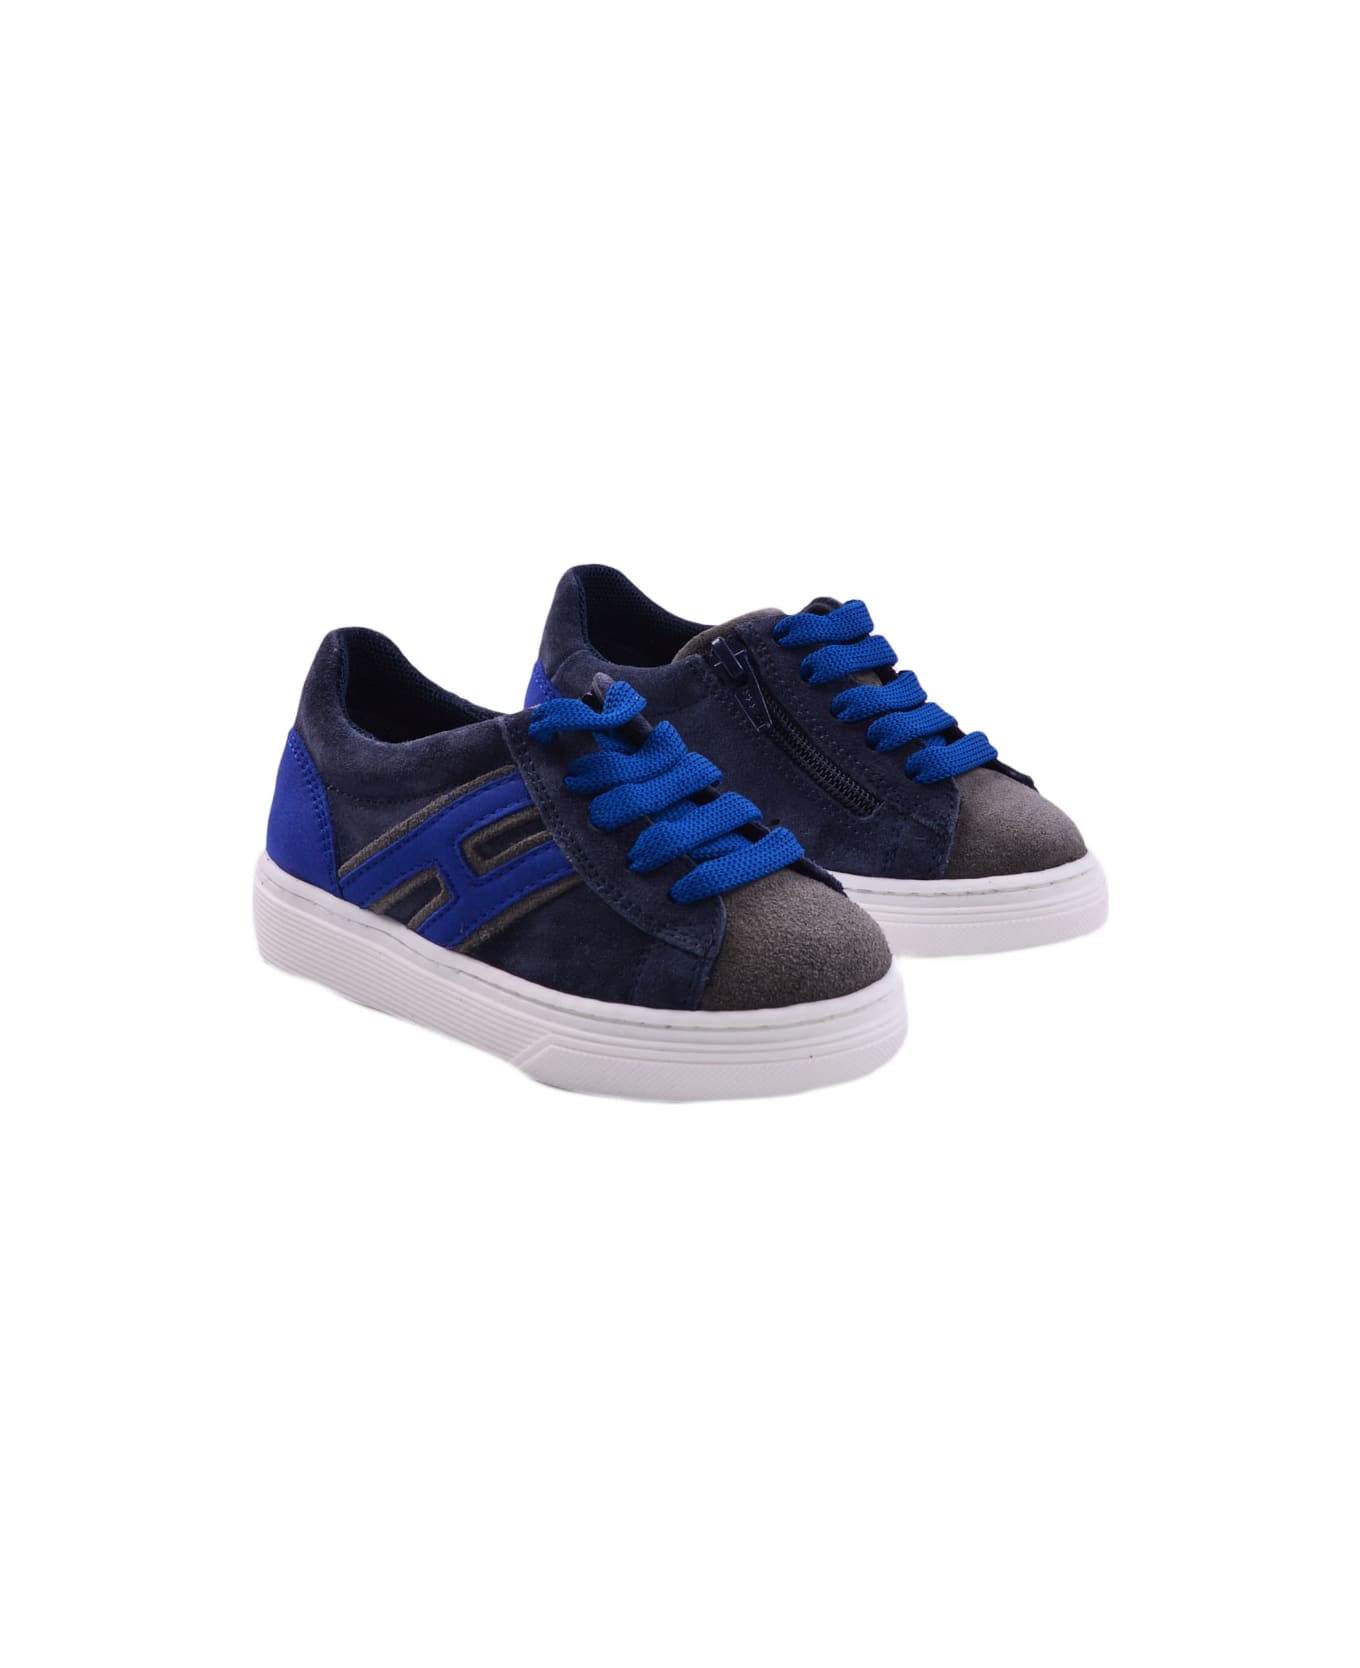 Hogan H365 Sneakers In Suede Leather - Blue